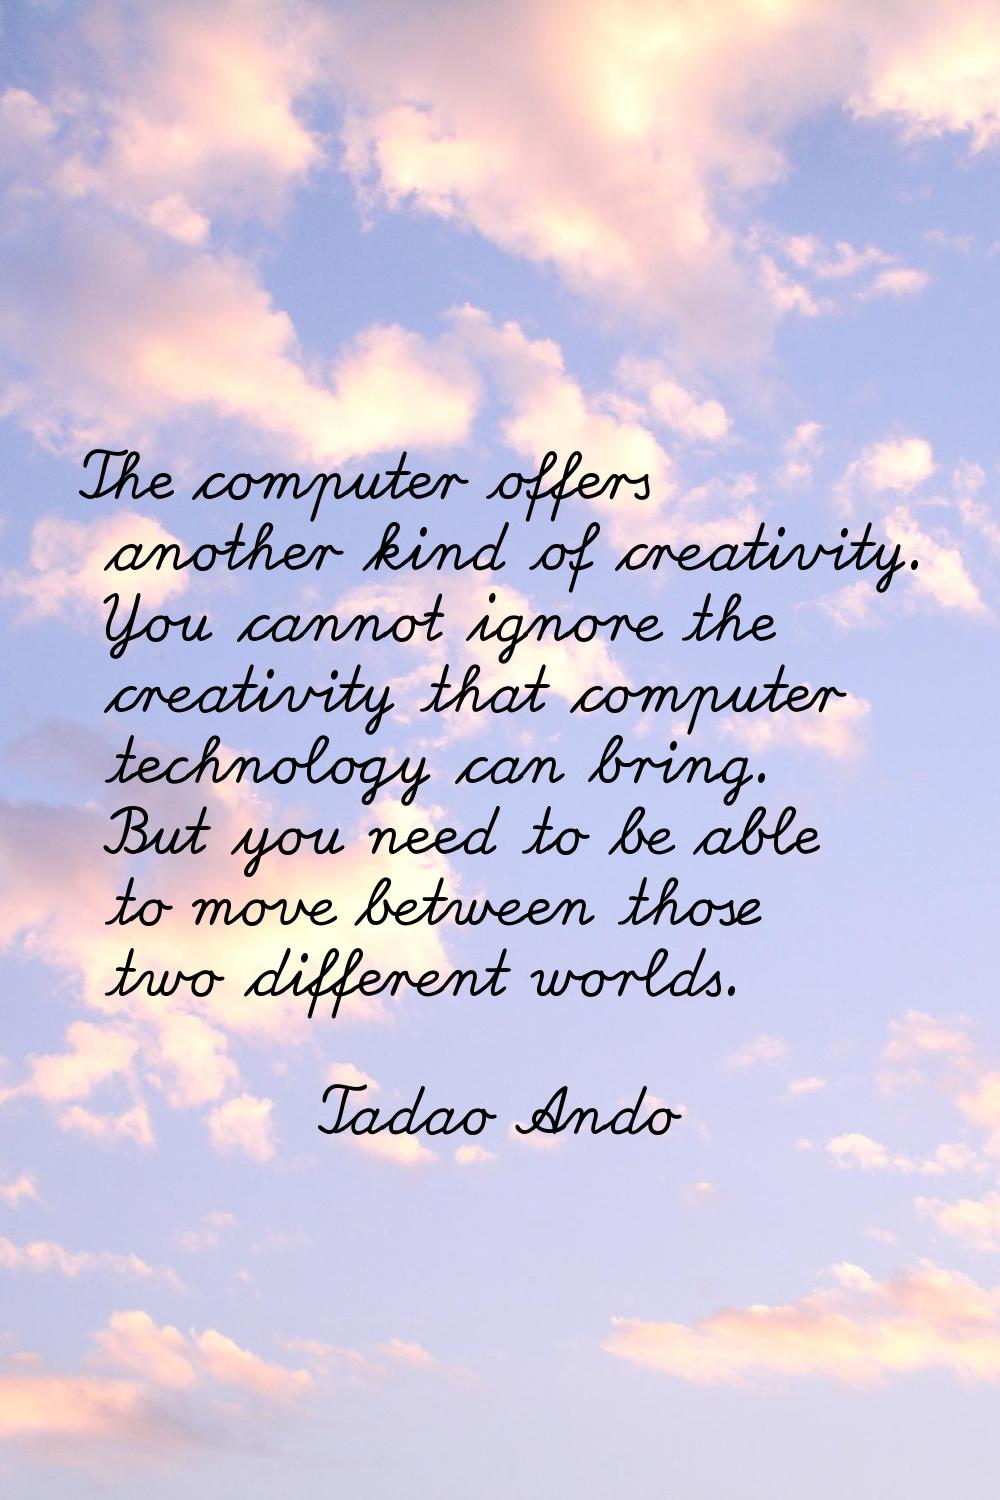 The computer offers another kind of creativity. You cannot ignore the creativity that computer tech